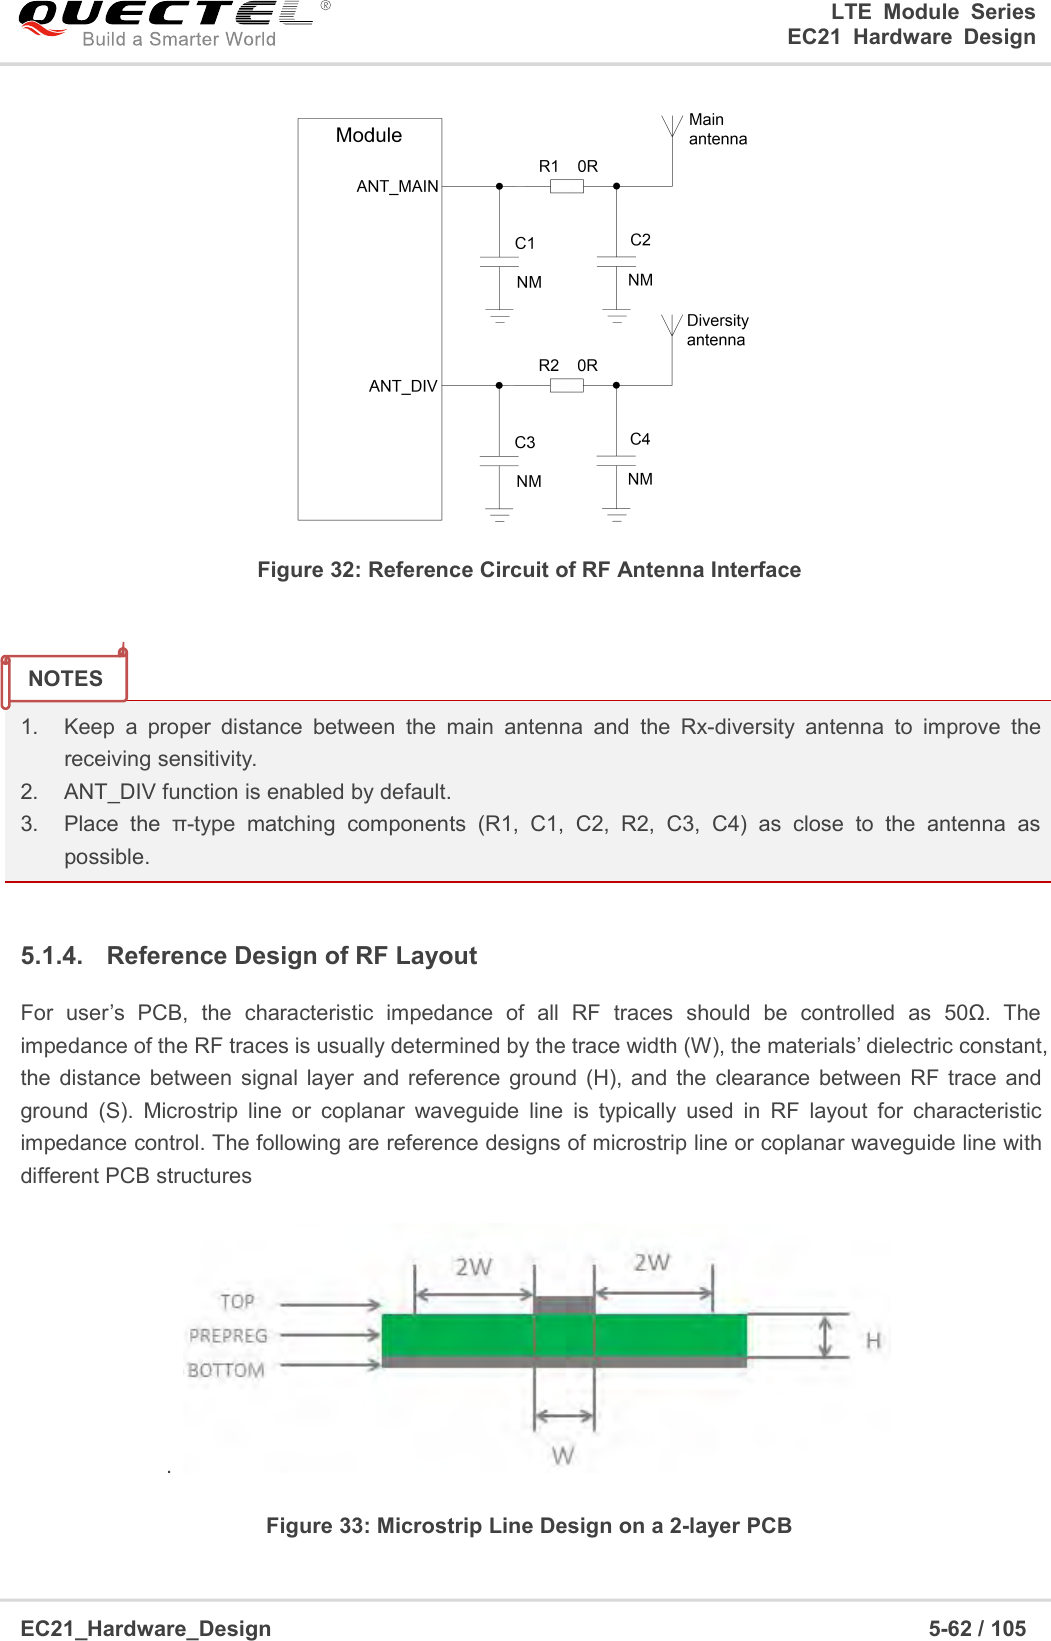 LTE Module SeriesEC21 Hardware DesignEC21_Hardware_Design 5-62 / 105Figure 32: Reference Circuit of RF Antenna Interface1. Keep a proper distance between the main antenna and the Rx-diversity antenna to improve thereceiving sensitivity.2. ANT_DIV function is enabled by default.3. Place the π-type matching components (R1, C1, C2, R2, C3, C4) as close to the antenna aspossible.5.1.4. Reference Design of RF LayoutFor user’s PCB, the characteristic impedance of all RF traces should be controlled as 50Ω. Theimpedance of the RF traces is usually determined by the trace width (W), the materials’ dielectric constant,the distance between signal layer and reference ground (H), and the clearance between RF trace andground (S). Microstrip line or coplanar waveguide line is typically used in RF layout for characteristicimpedance control. The following are reference designs of microstrip line or coplanar waveguide line withdifferent PCB structures.Figure 33: Microstrip Line Design on a 2-layer PCBNOTES